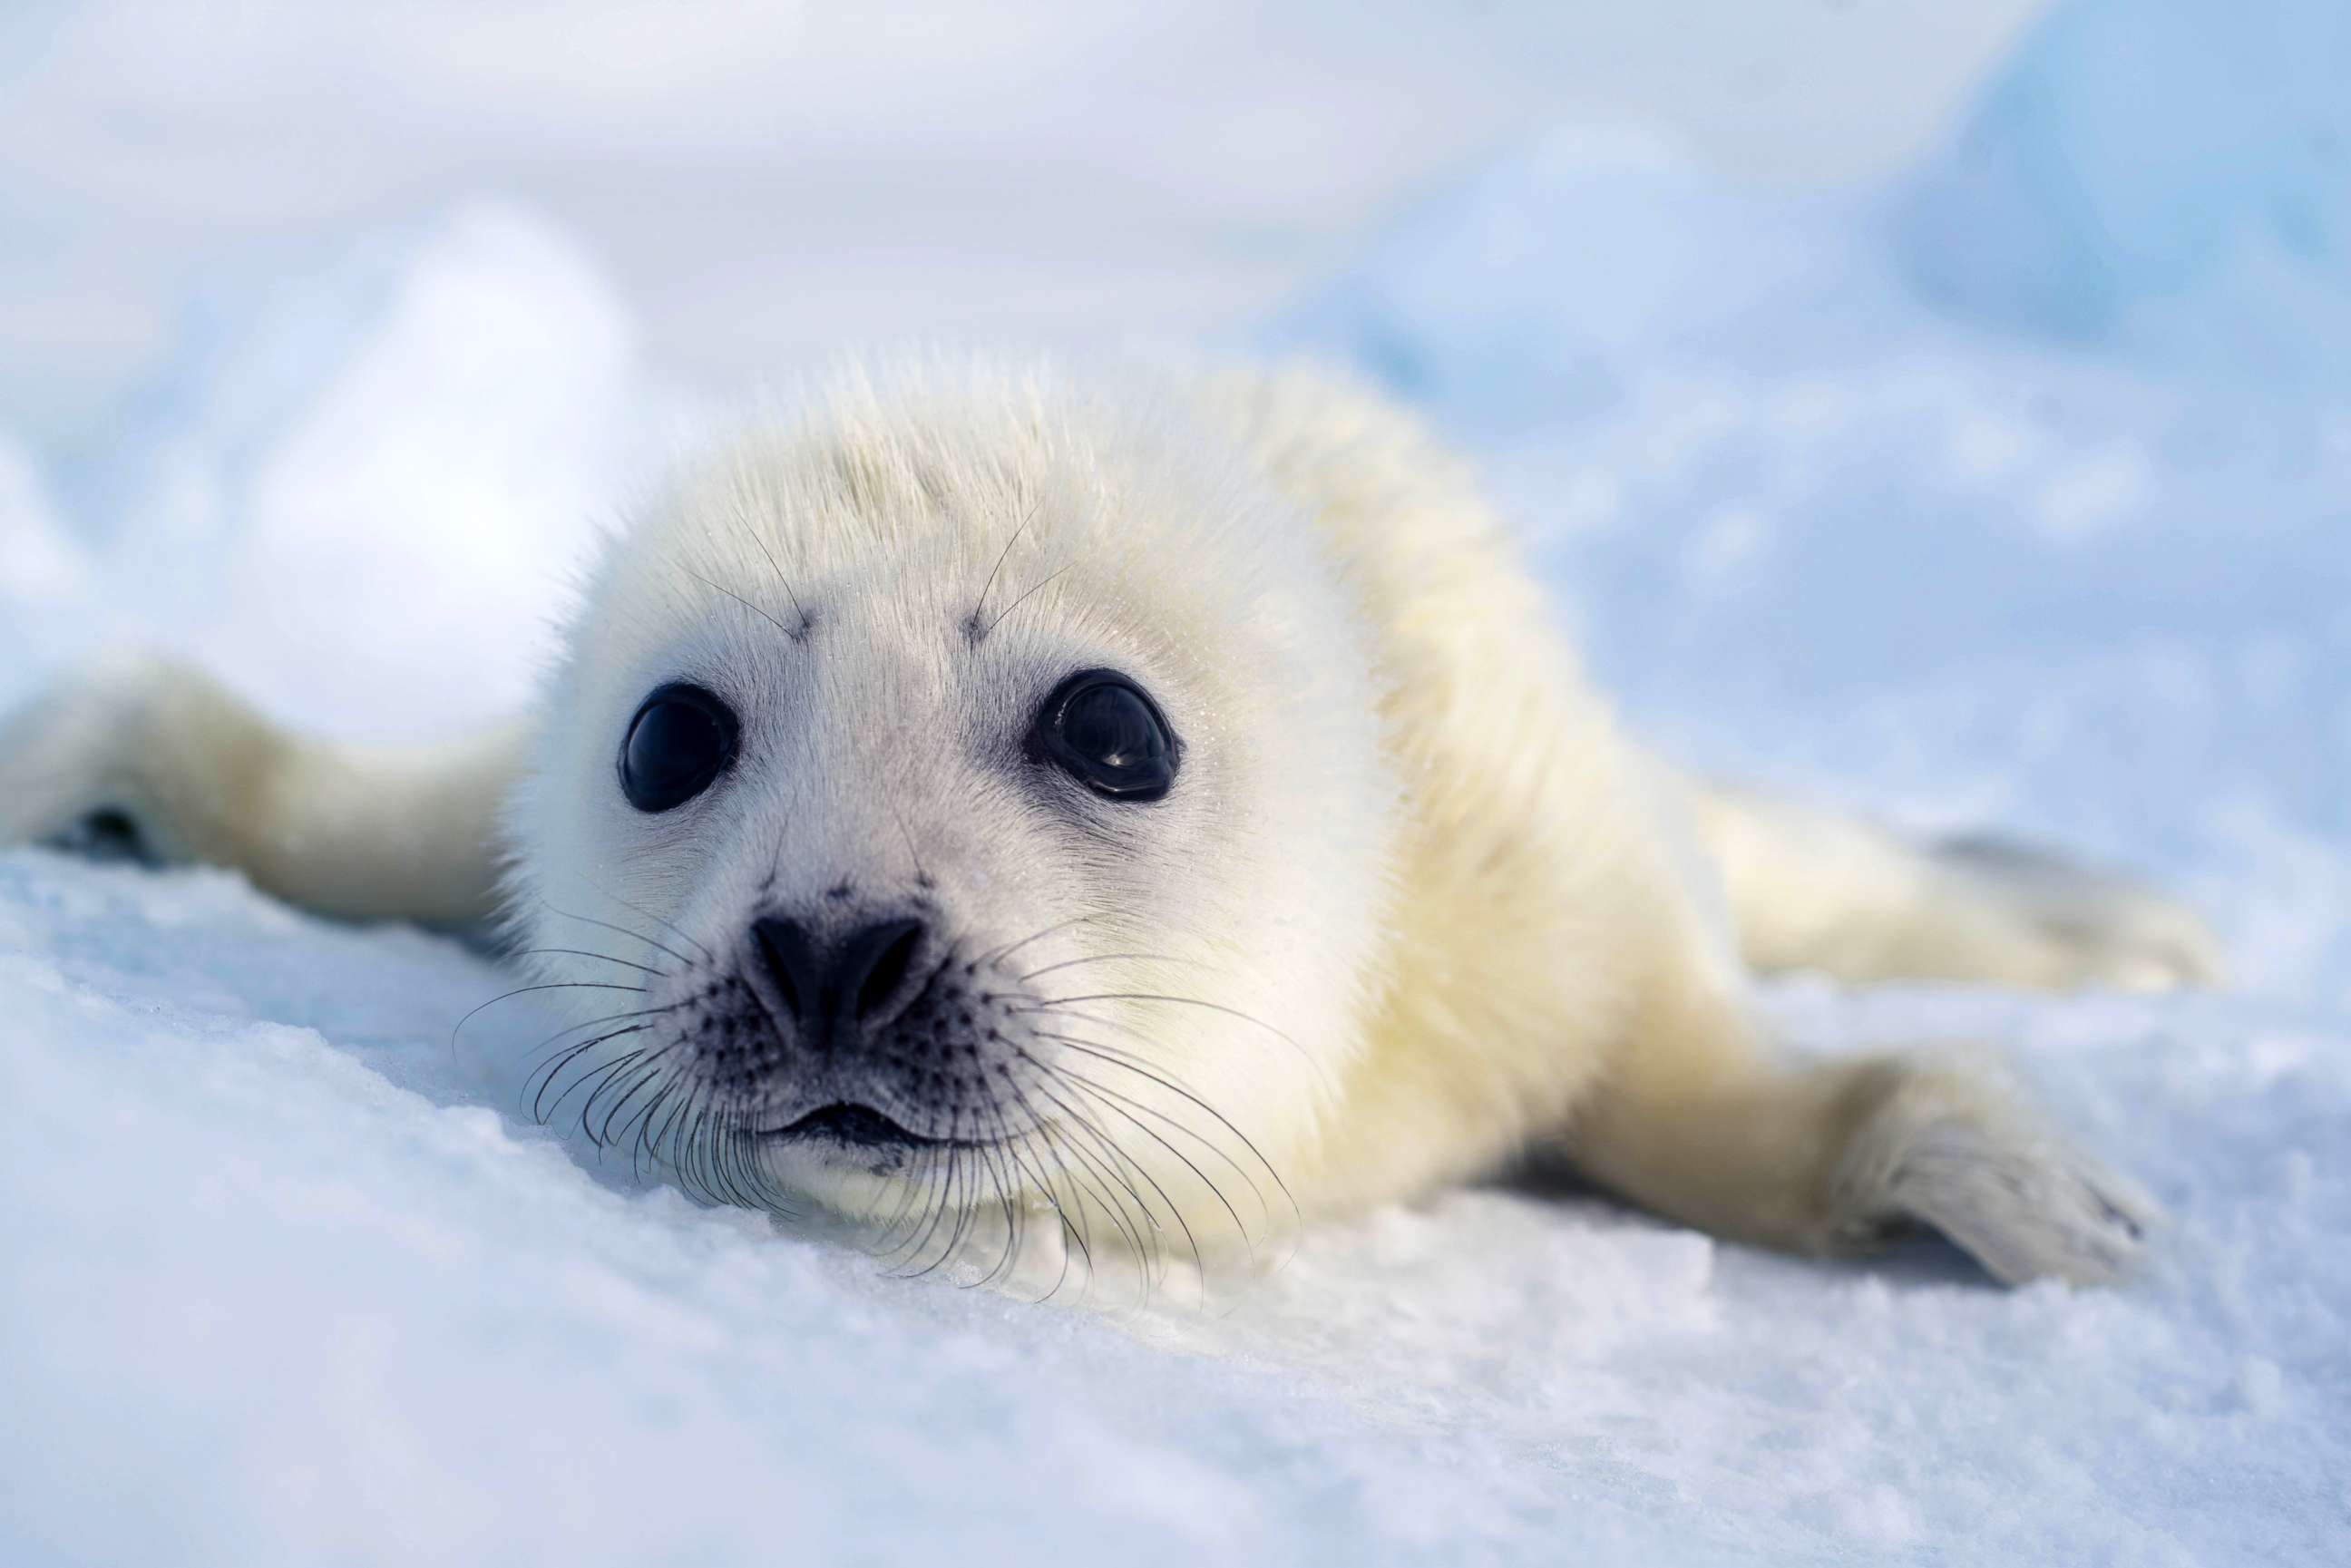 Extraordinary Earth: Here's how harp seal pups rely on ice floes in  northwest Atlantic - ABC News